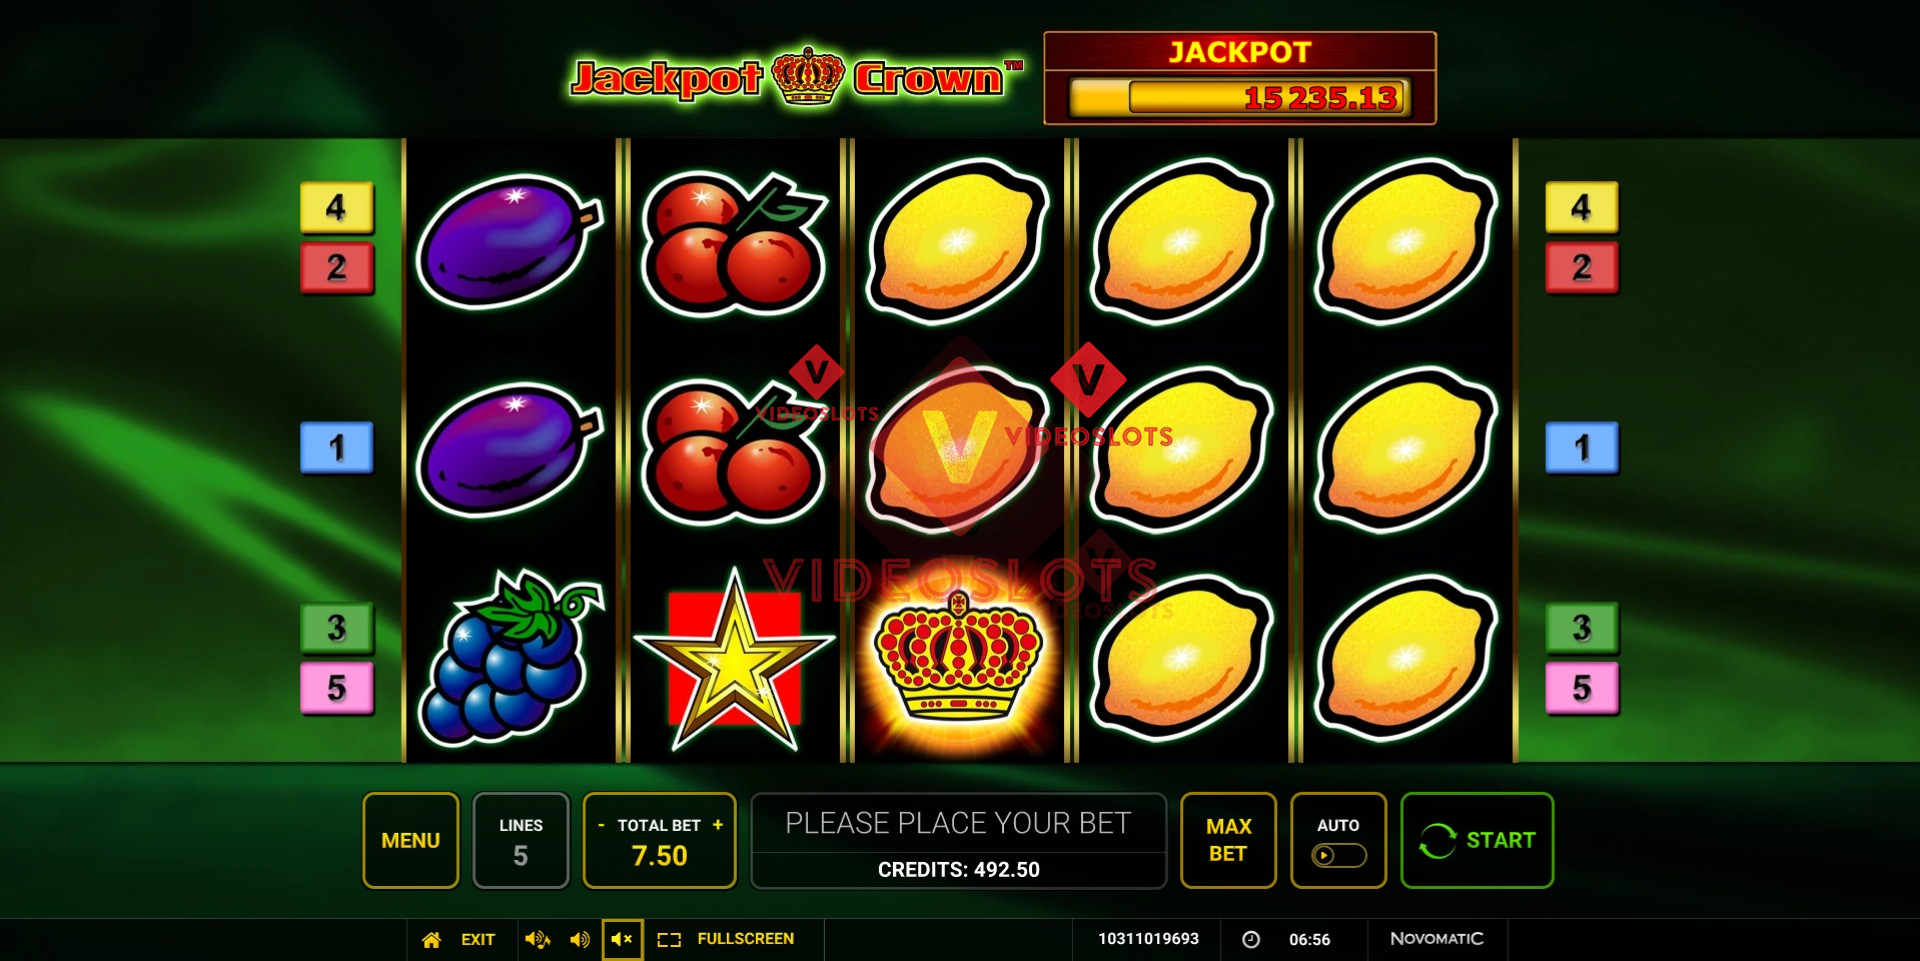 Base Game for Jackpot Crown slot from Greentube